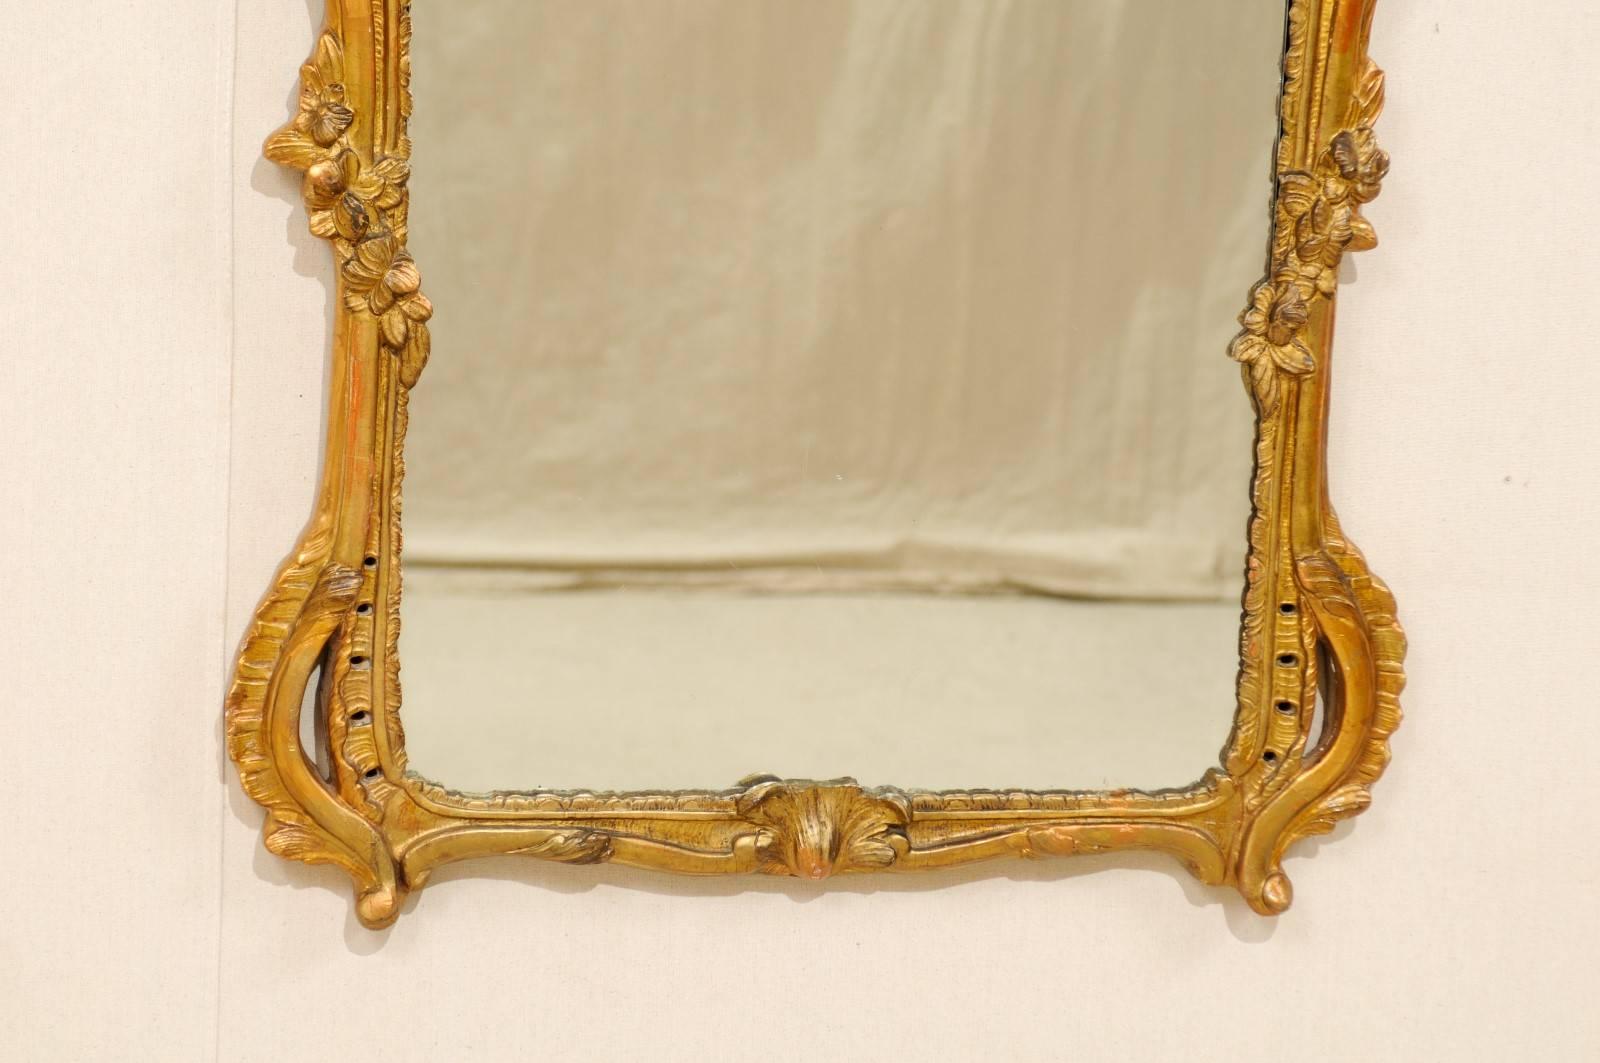 Carved 19th Century Italian Gold Painted Mirror with Gilding in Ornate Rococo Style